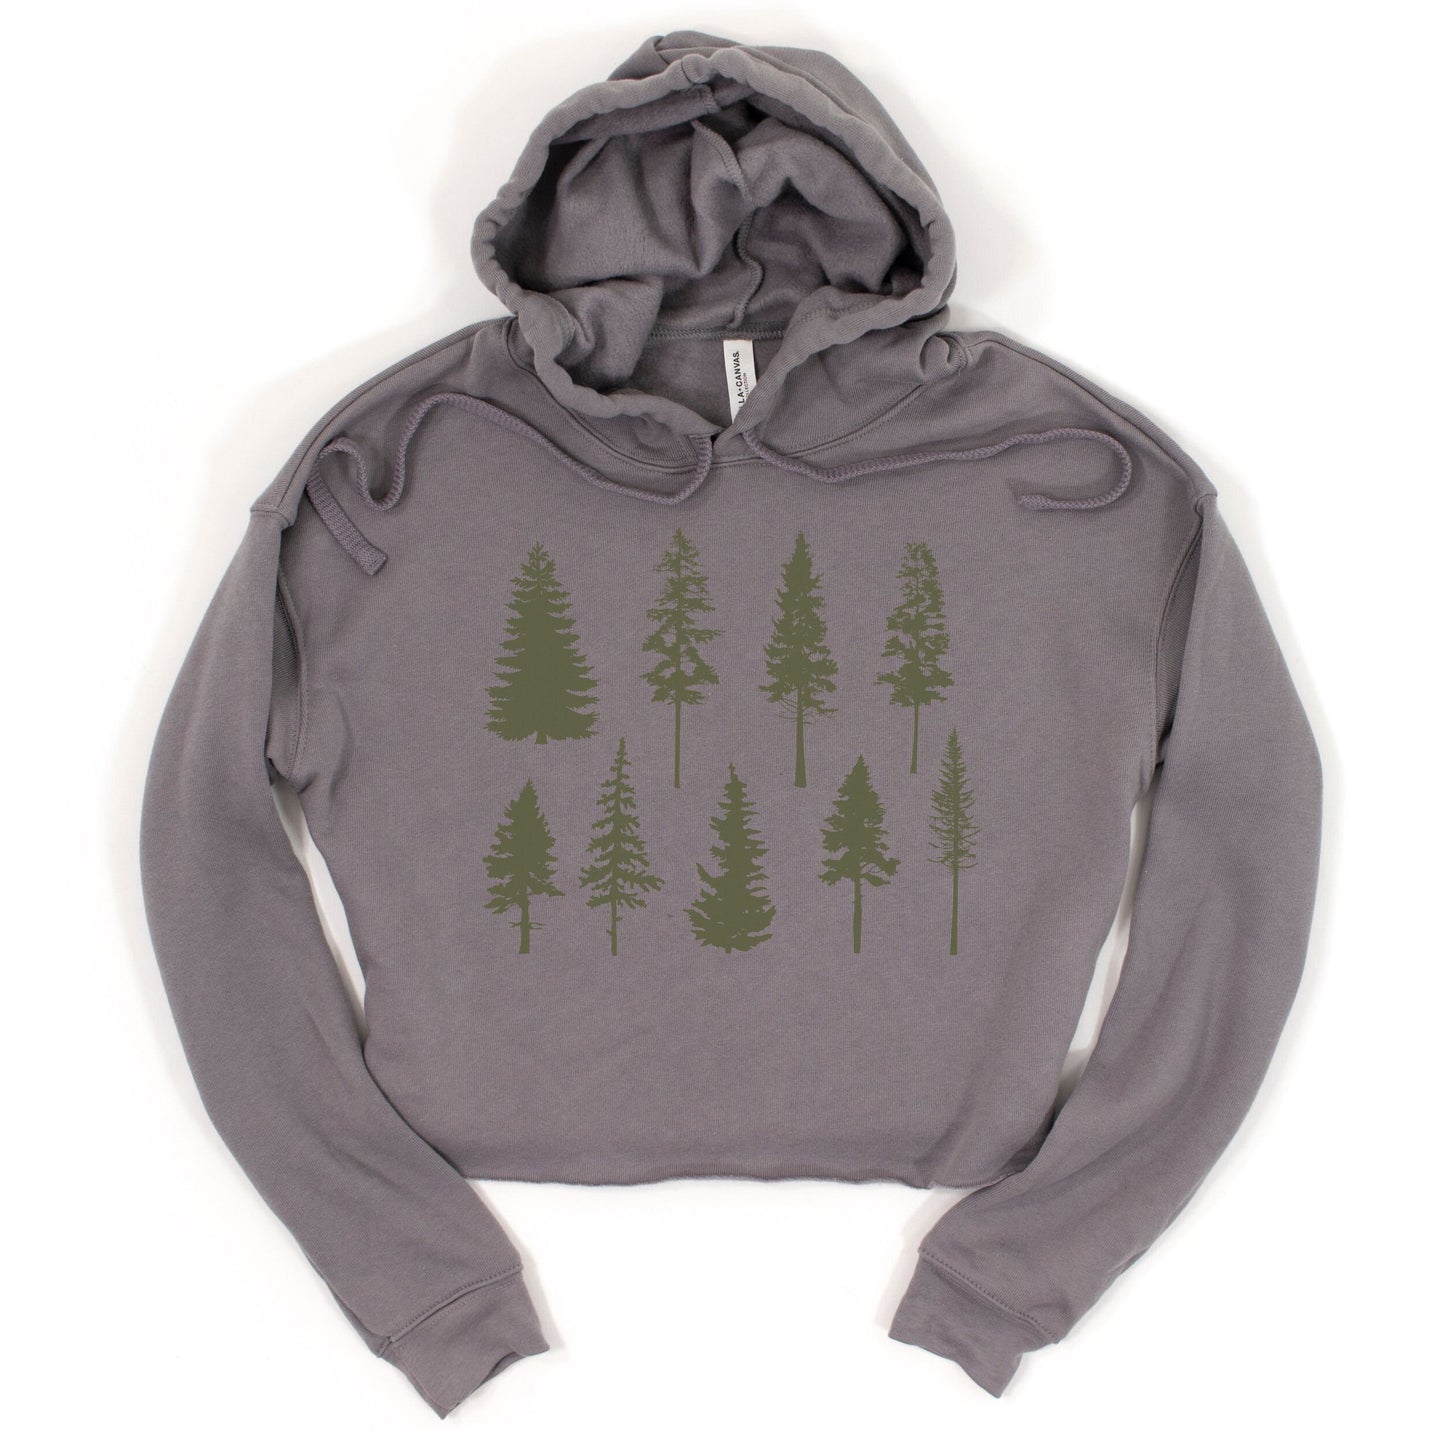 Forest Trees Silhouette Cropped Hoodie Granola Girl Aesthetic Nature Hoodie ForestCore Sweatshirt Outdoors Adventurer Cropped Shirt